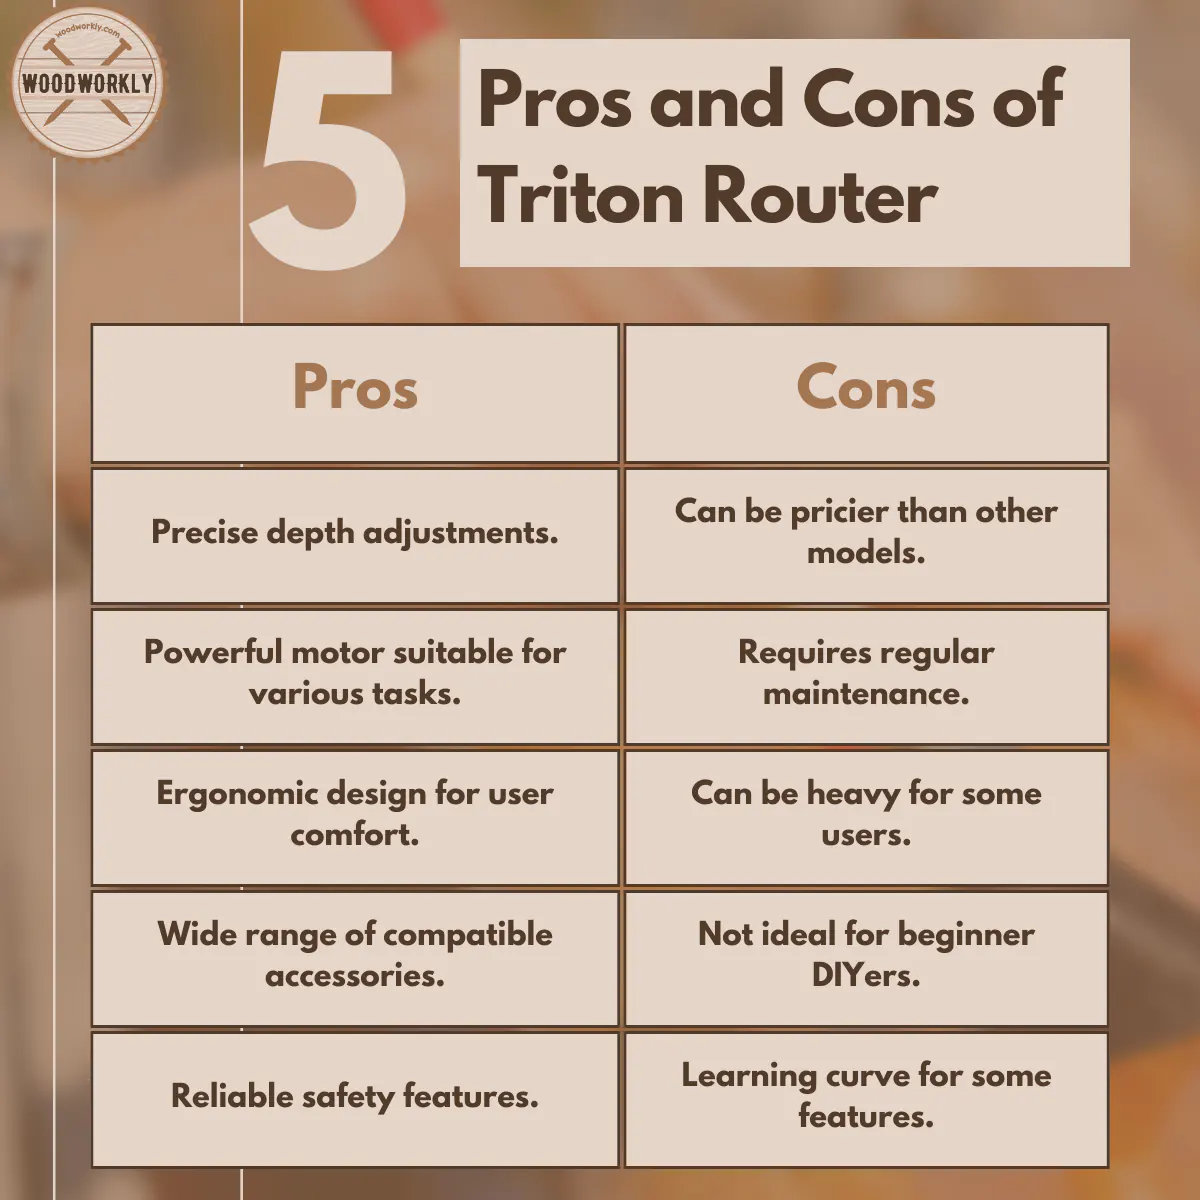 Pros and Cons of the Triton Router